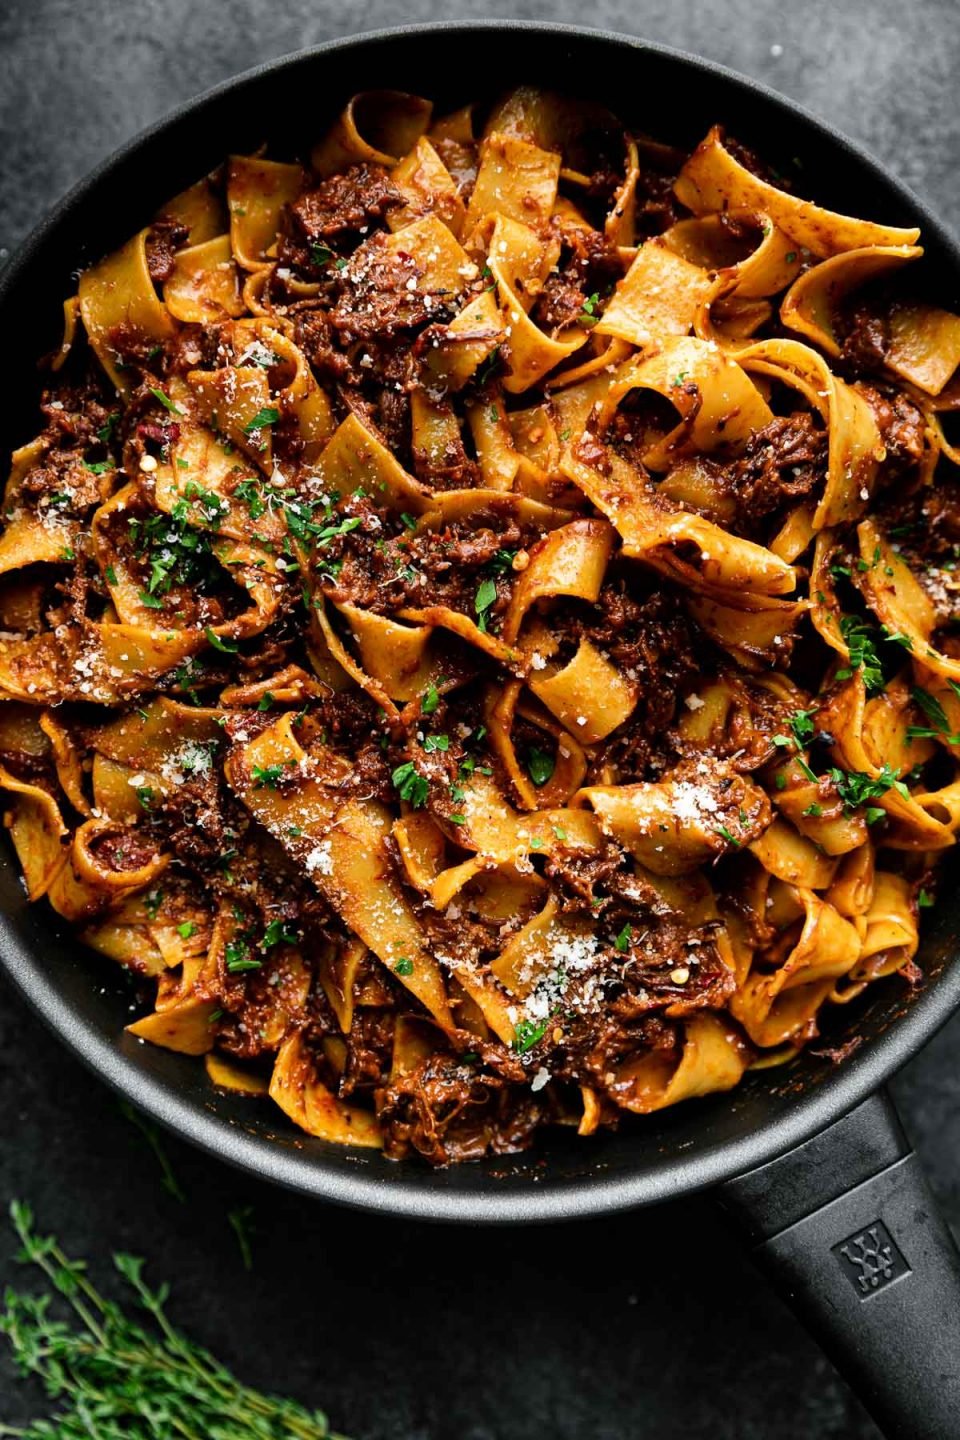 Slowly Braised Short Rib Ragu Pappardelle in a small skillet atop a black surface. The ragu has been topped with grated parmesan & fresh parsley. A few sprig of herbs rest alongside the skillet.